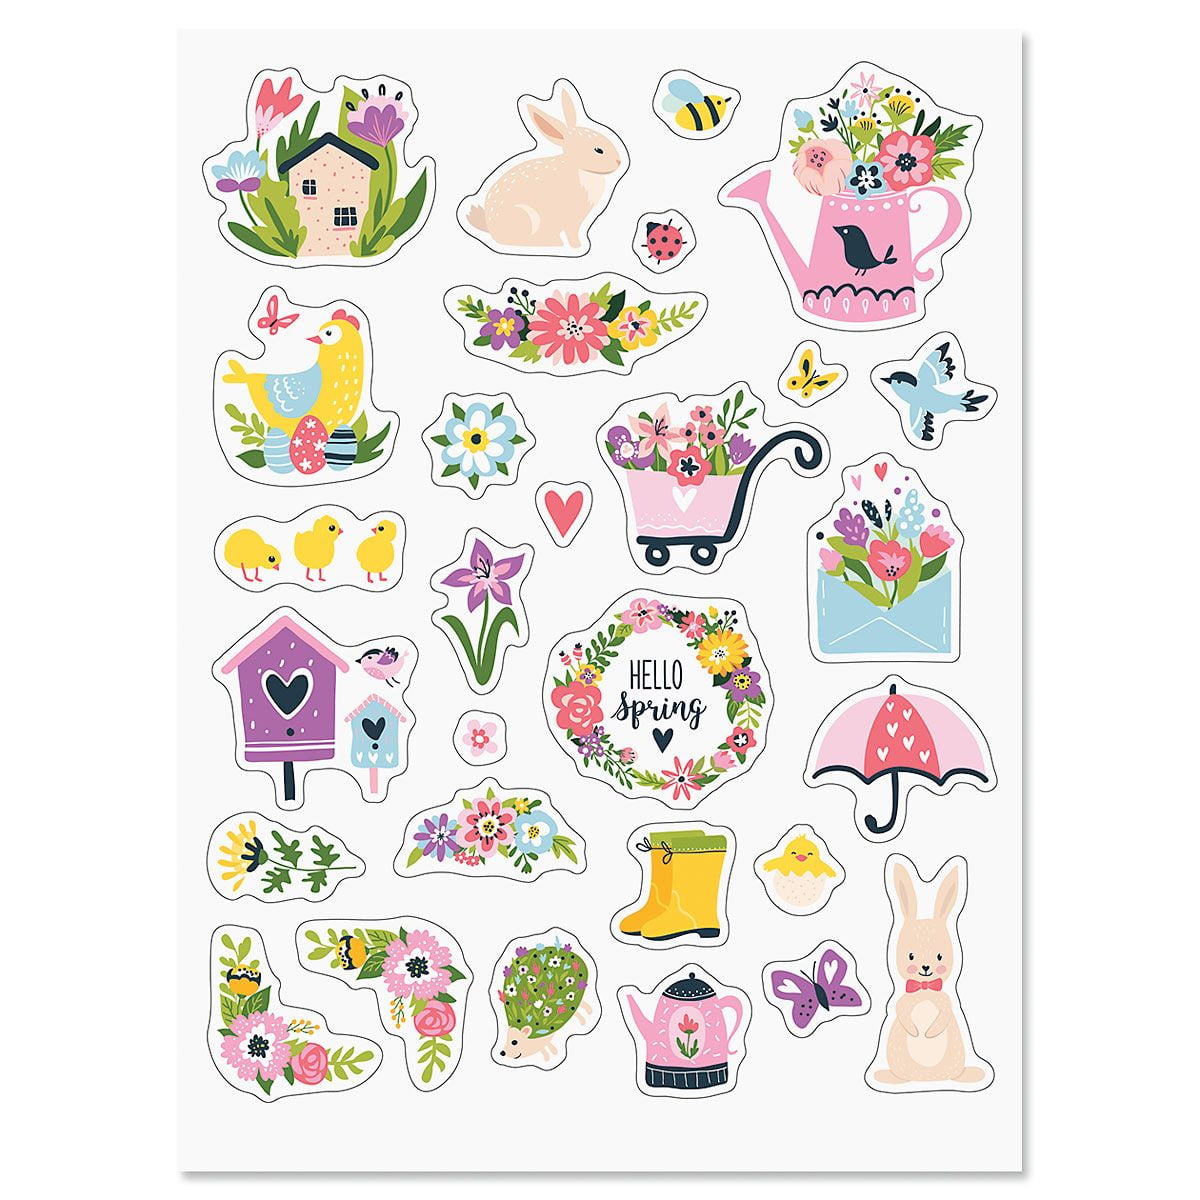 Wall Mirror Window 20 x Easter Bunny stickers Crafting Scrapbooking Cardmaking 